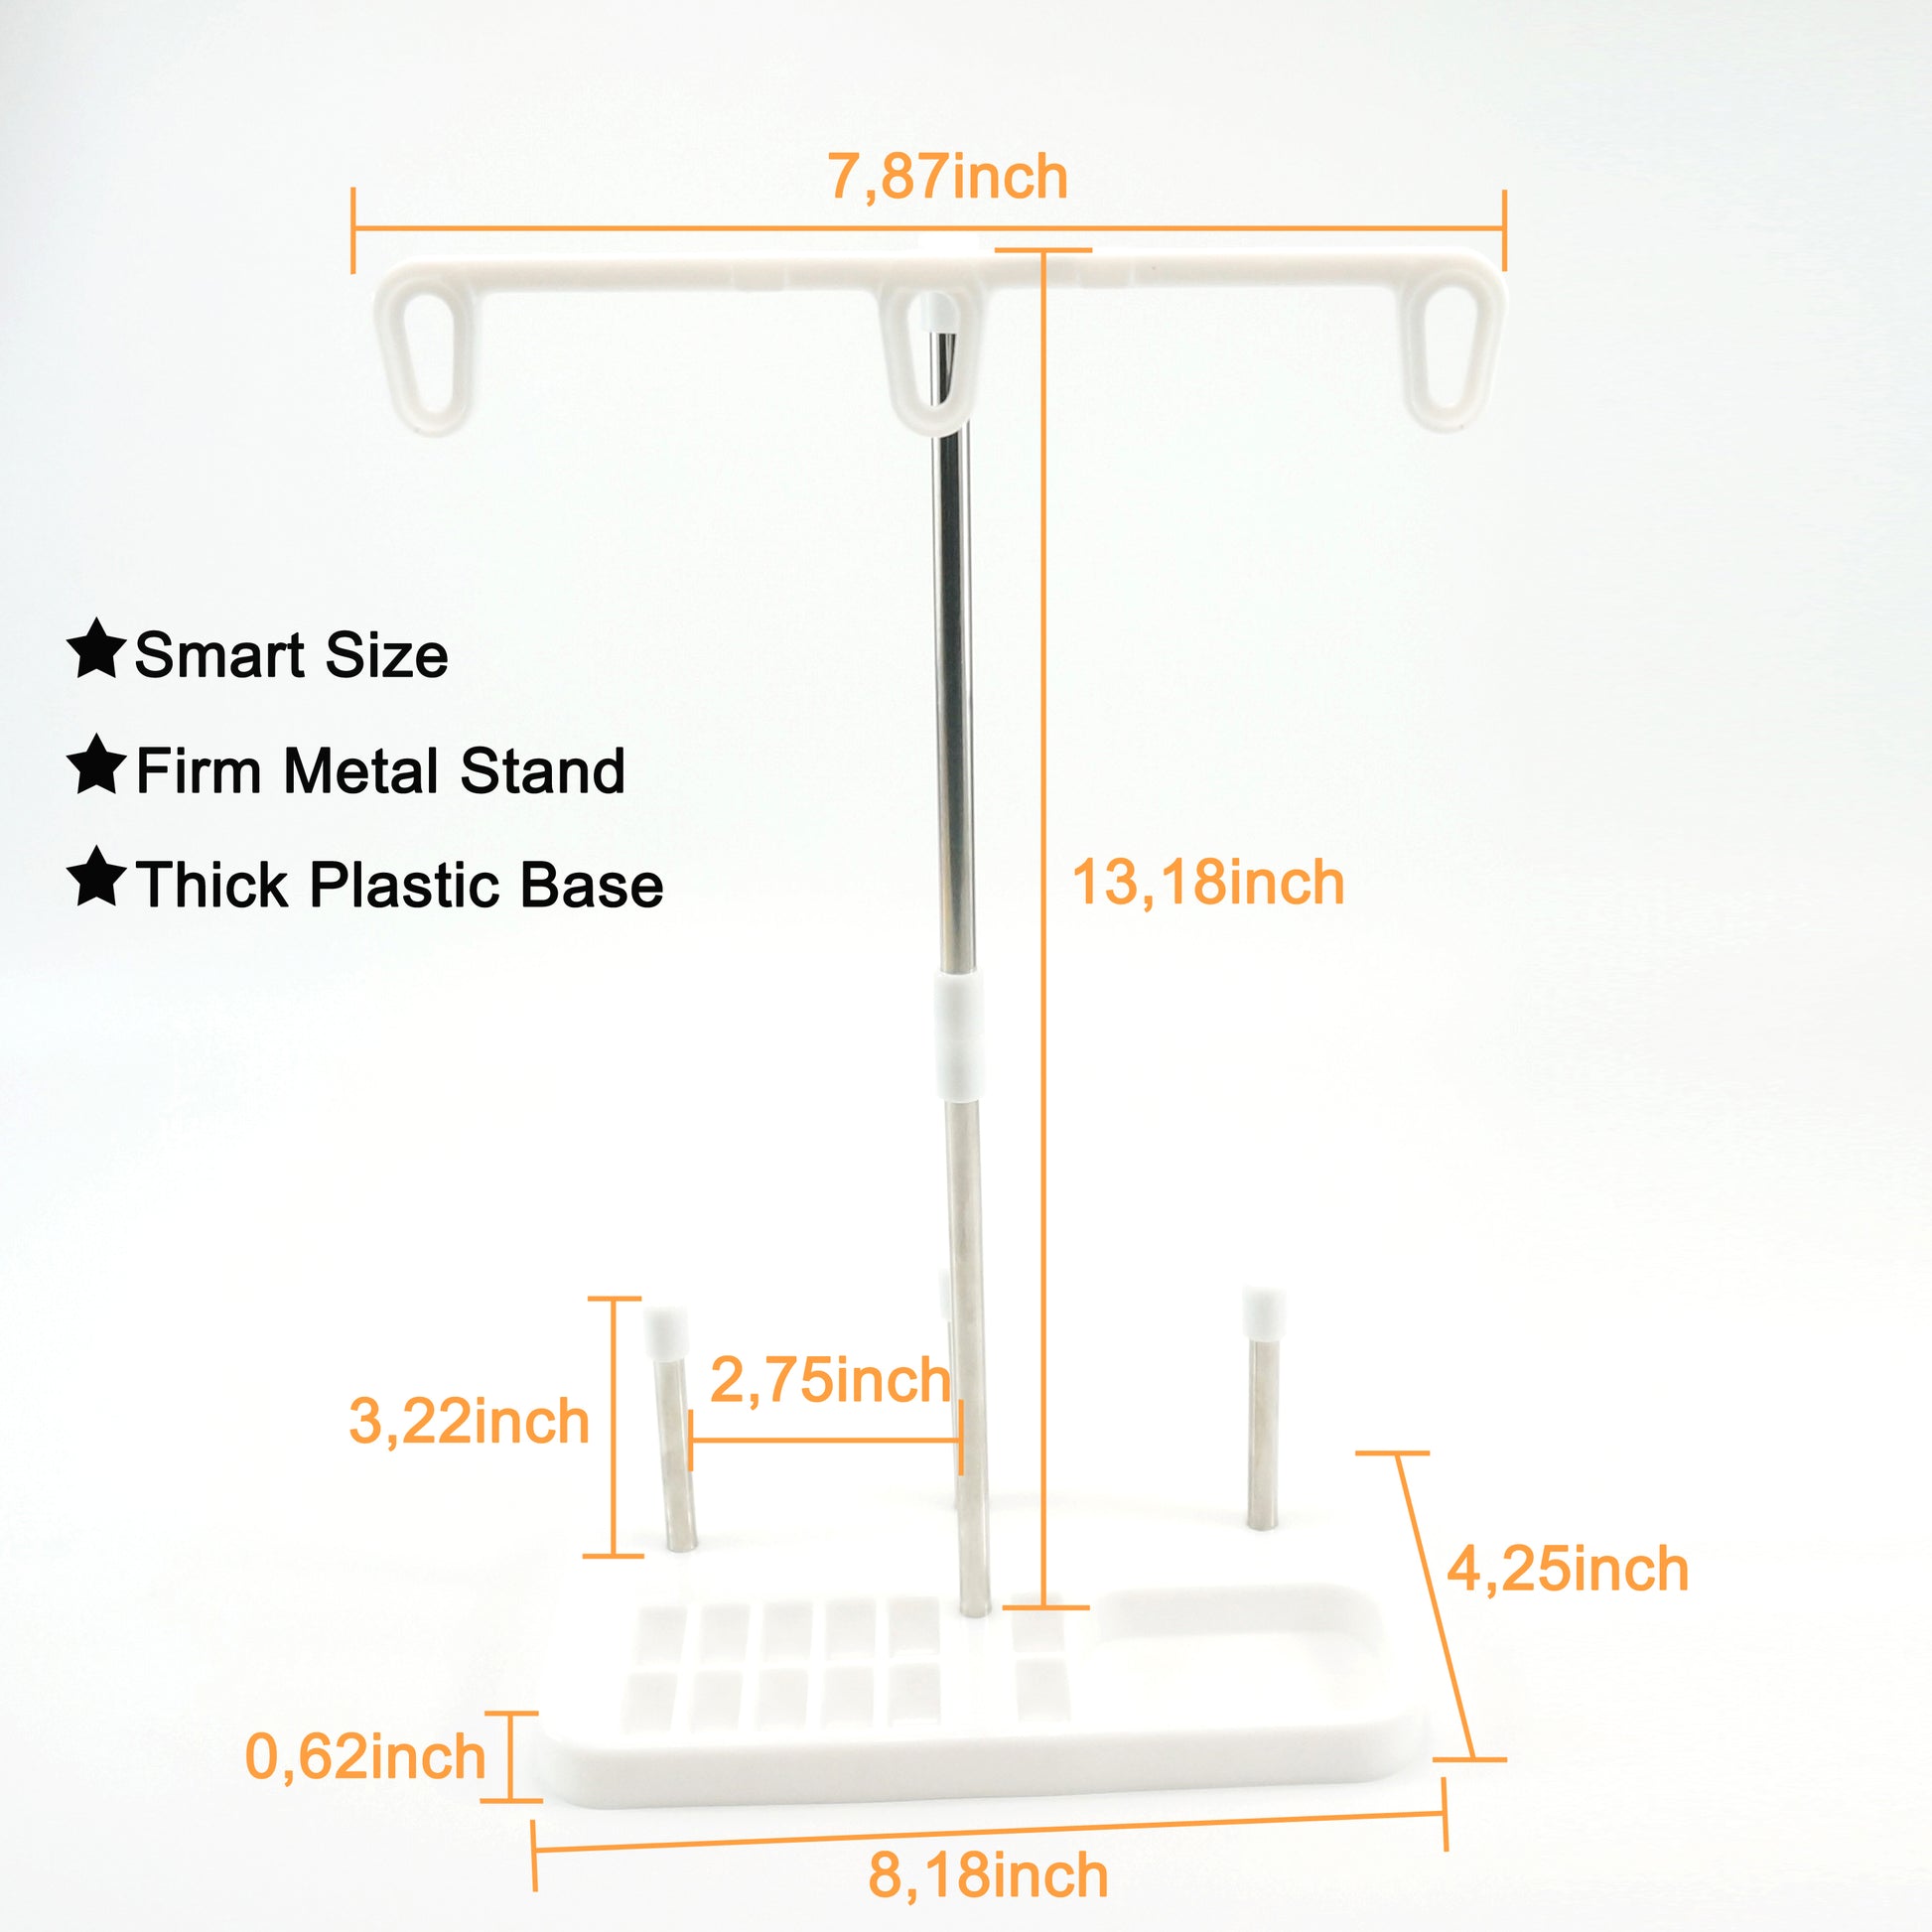 Embroidex - 20 Spool Thread Stand for All Home Embroidery Machines Brother